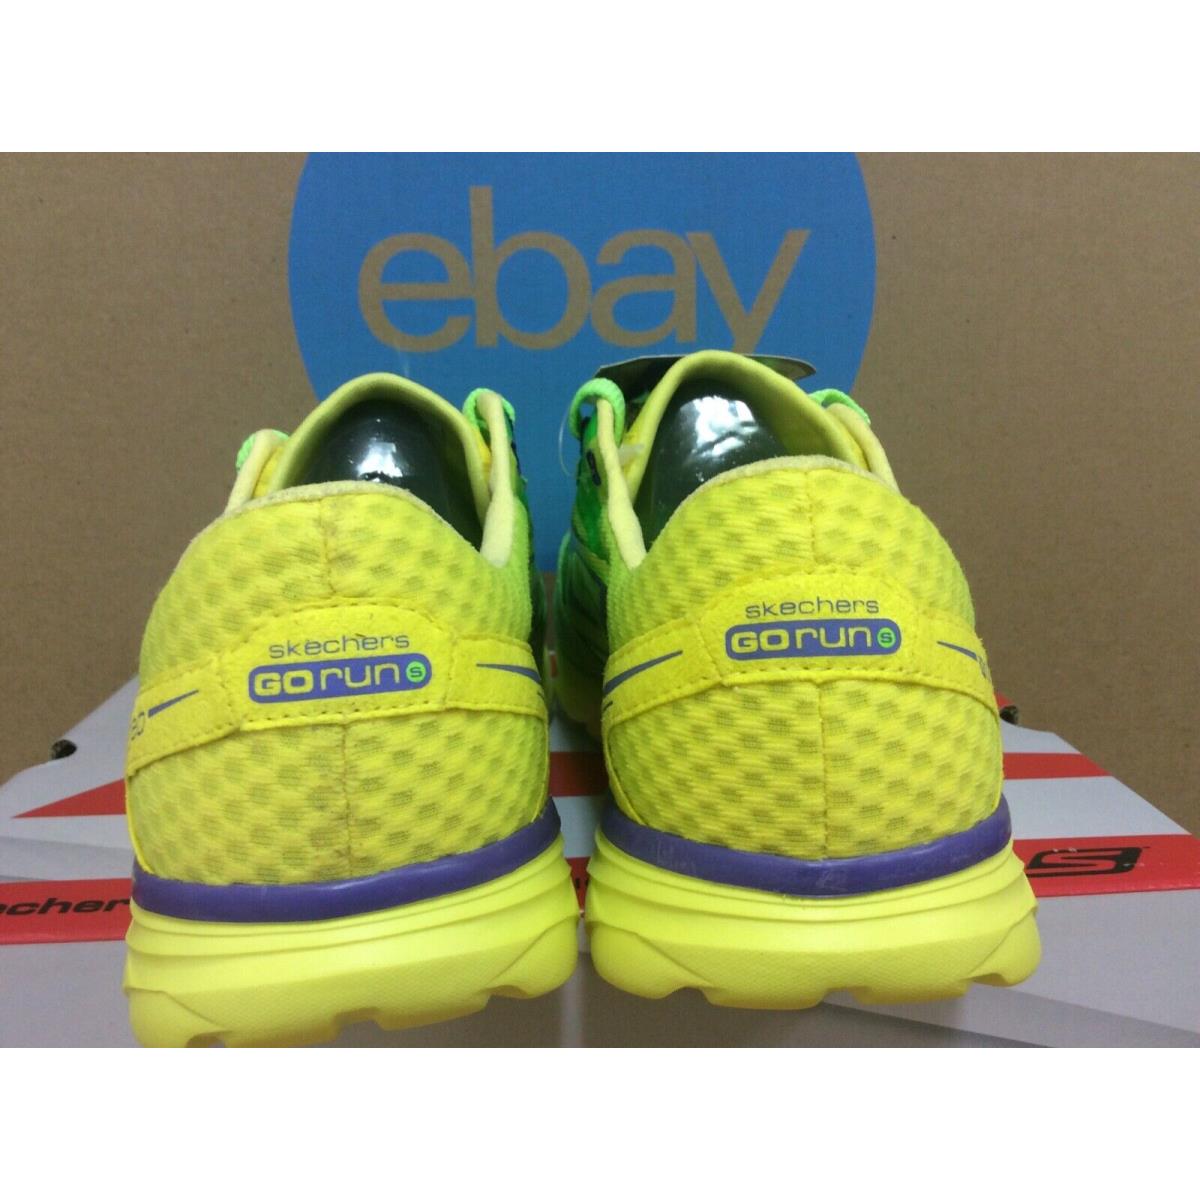 Skechers shoes Run Speed - Gray Lime 5